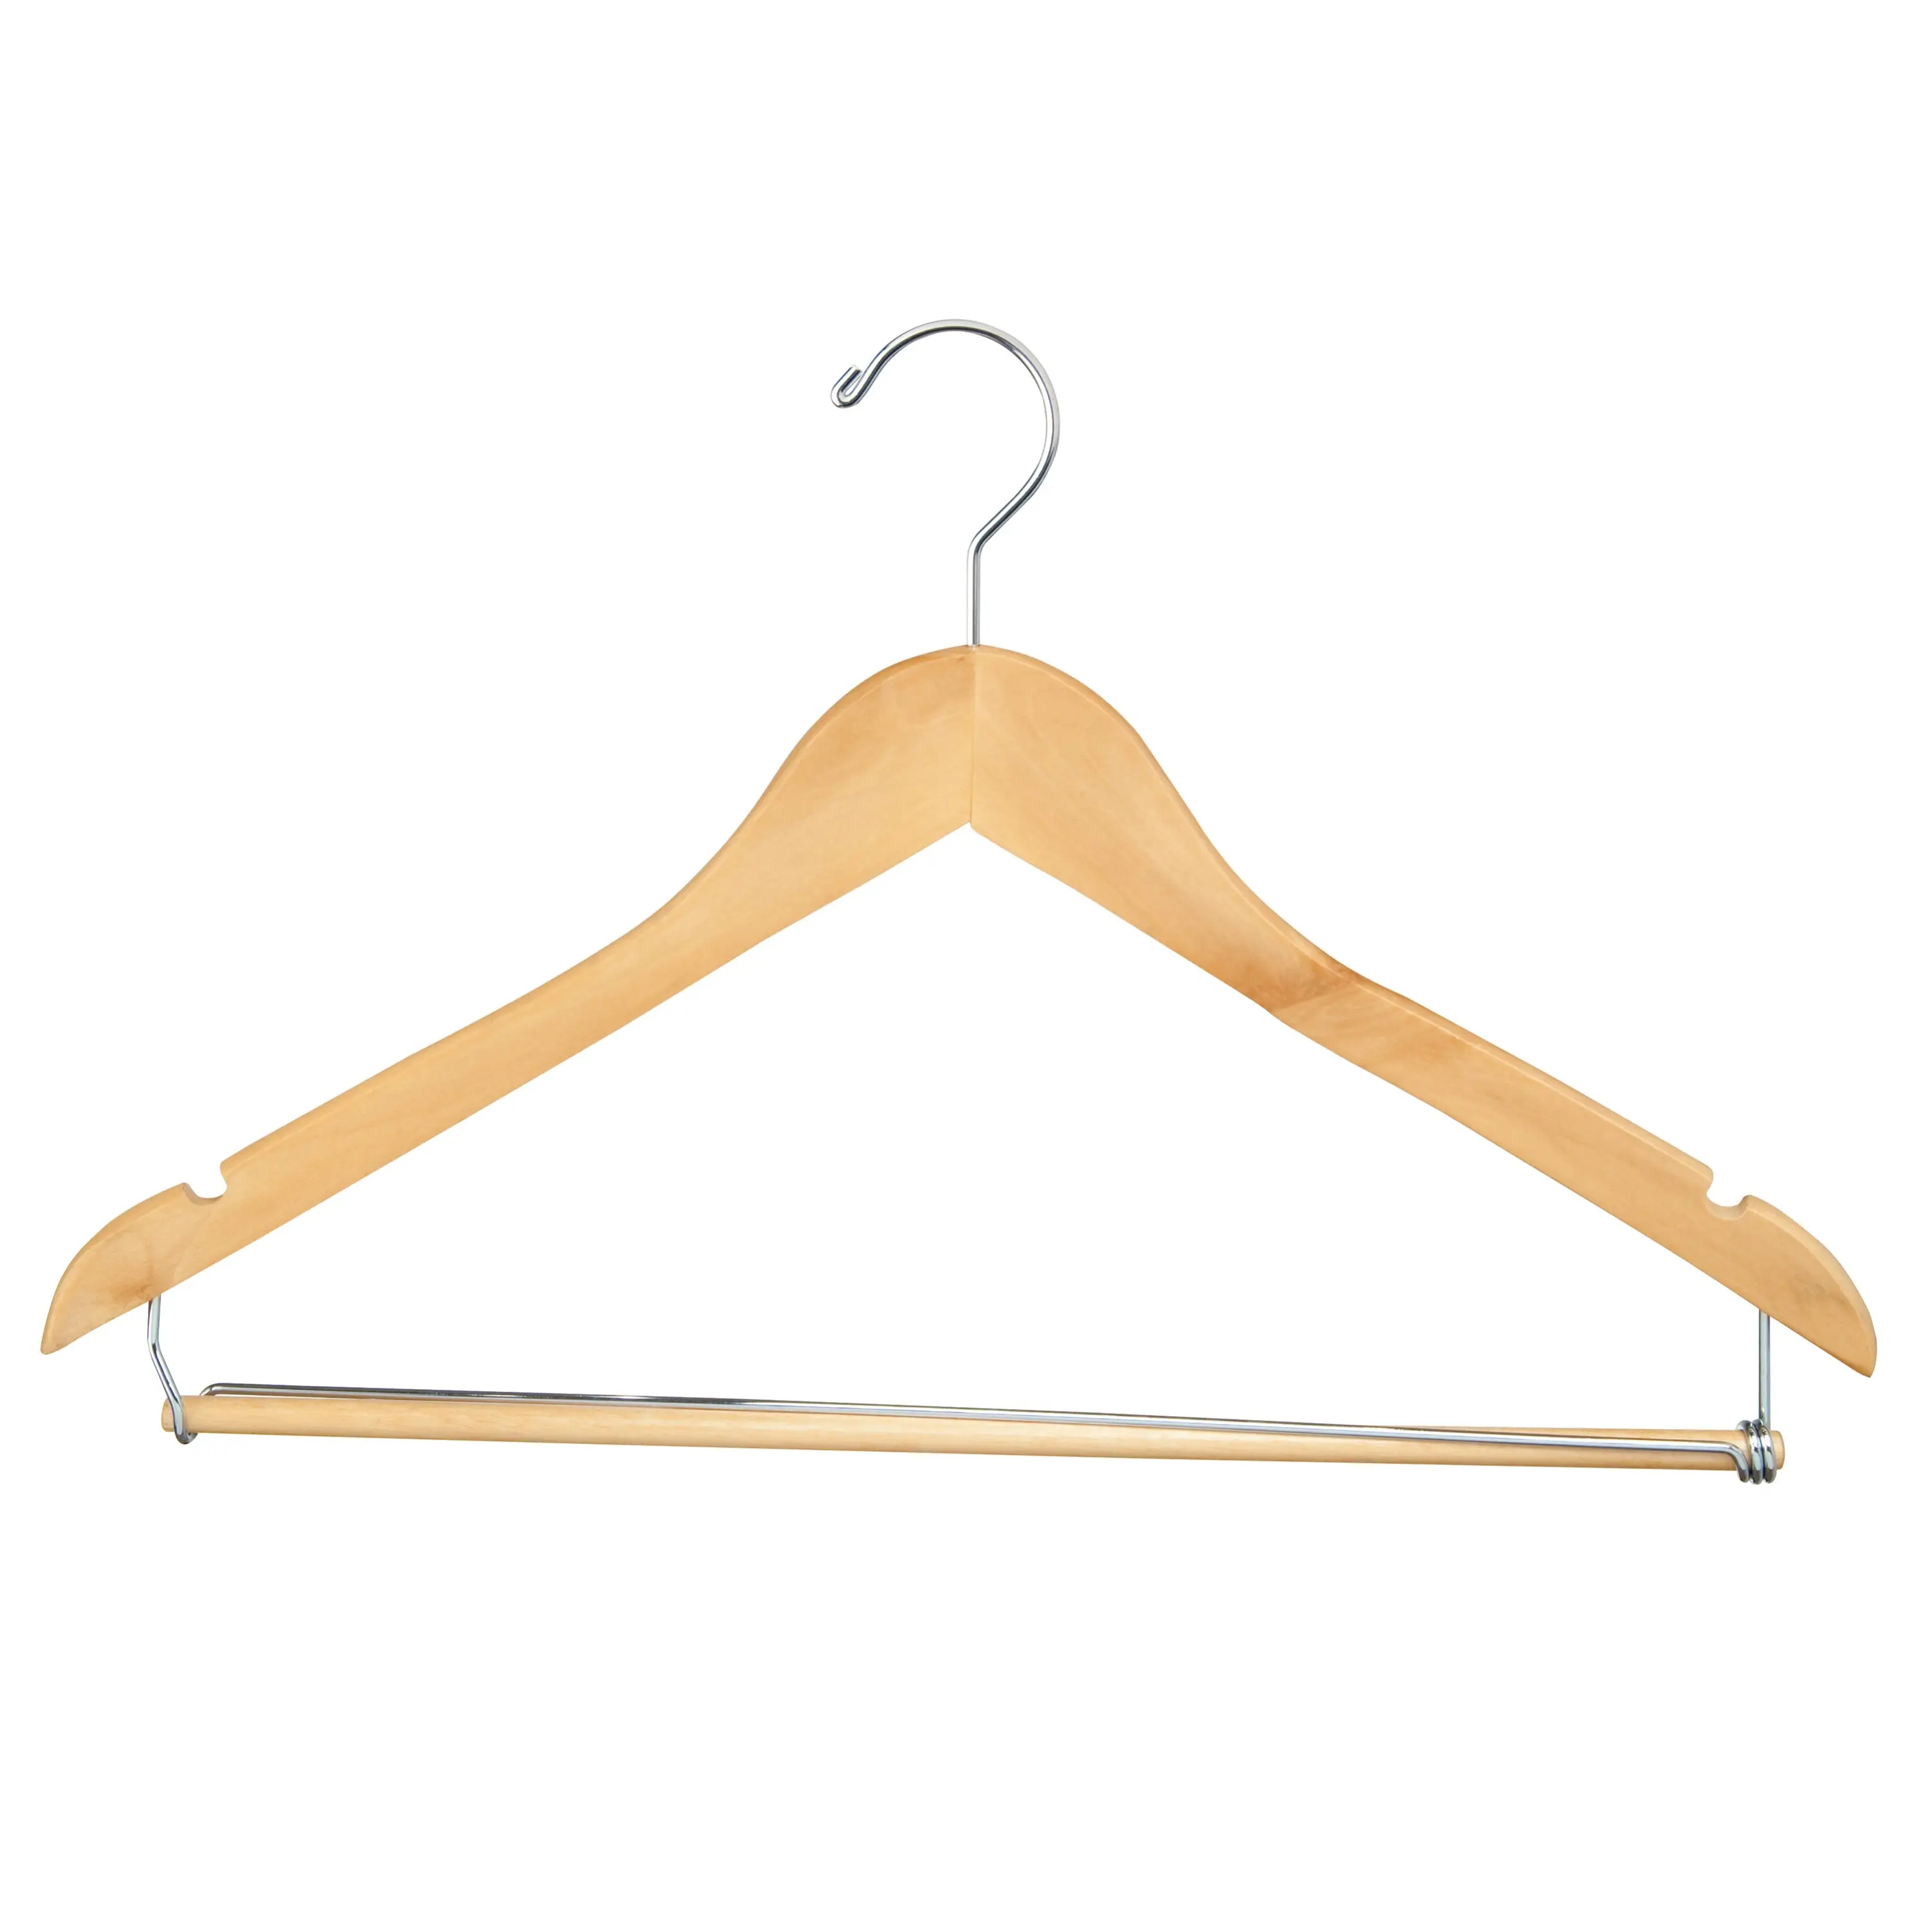 https://cdn11.bigcommerce.com/s-u7ds2t/images/stencil/original/products/1389/8555/17_Wood_Flat_Suit_Hanger_With_Locking_Bar_Natural_2__96956.1697748410.jpg?c=2